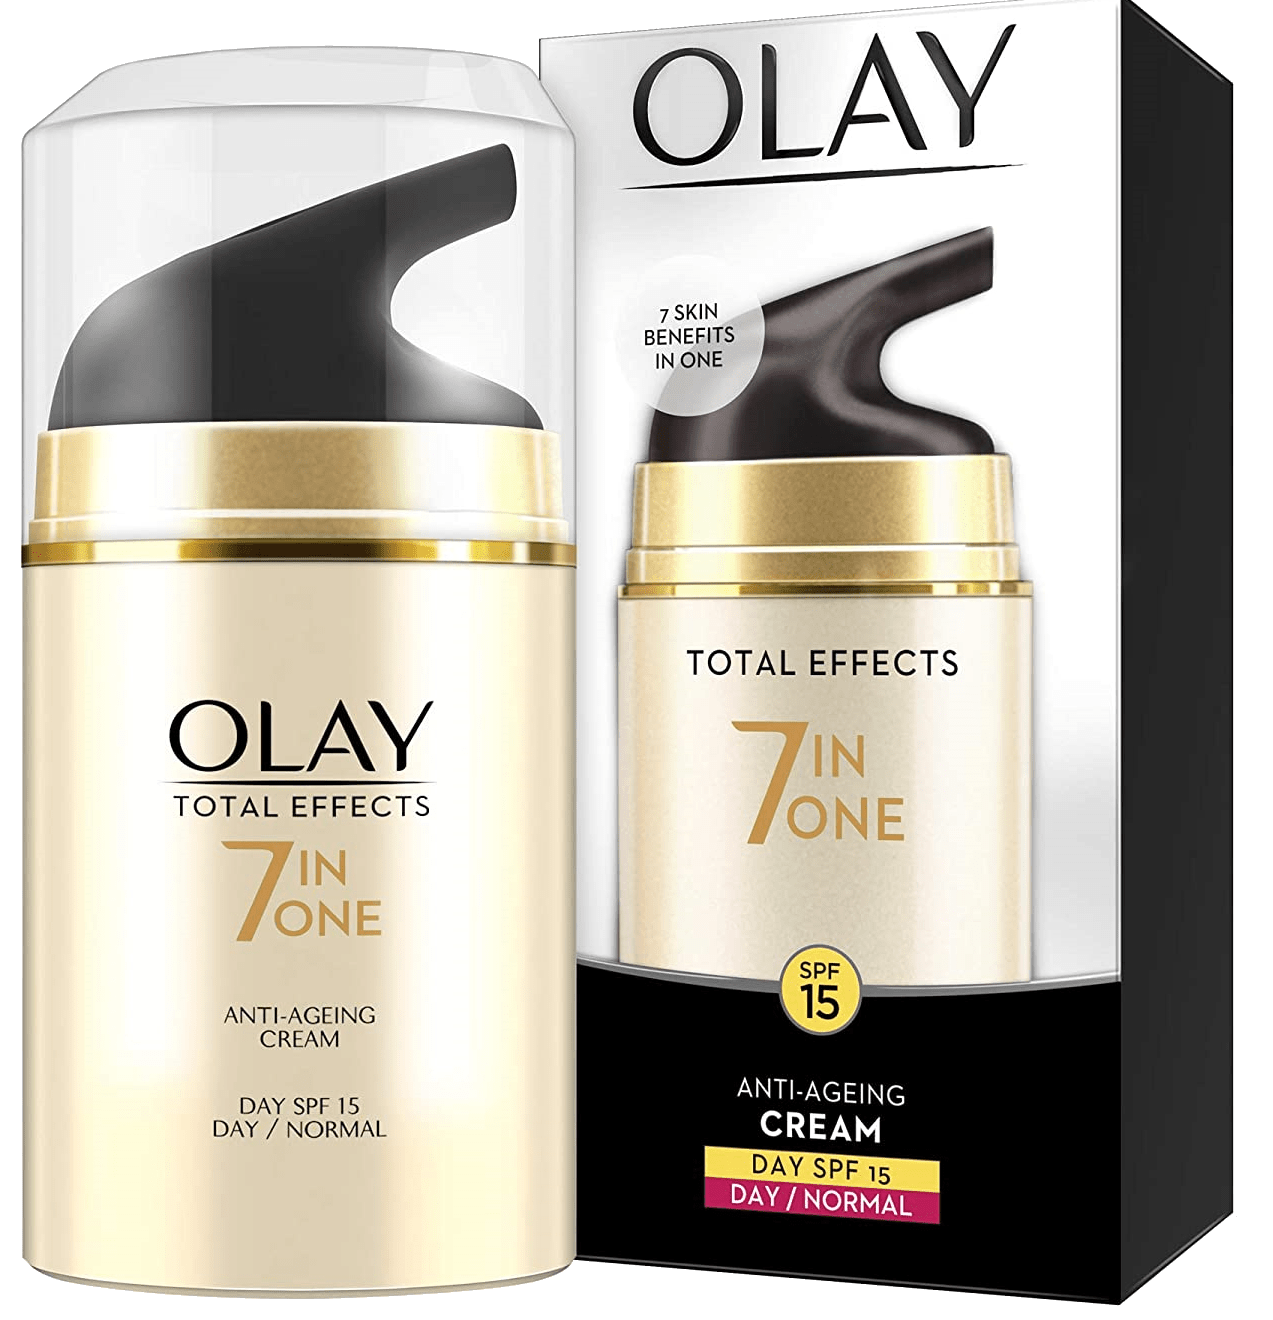 Olay Total Effects 7 in 1